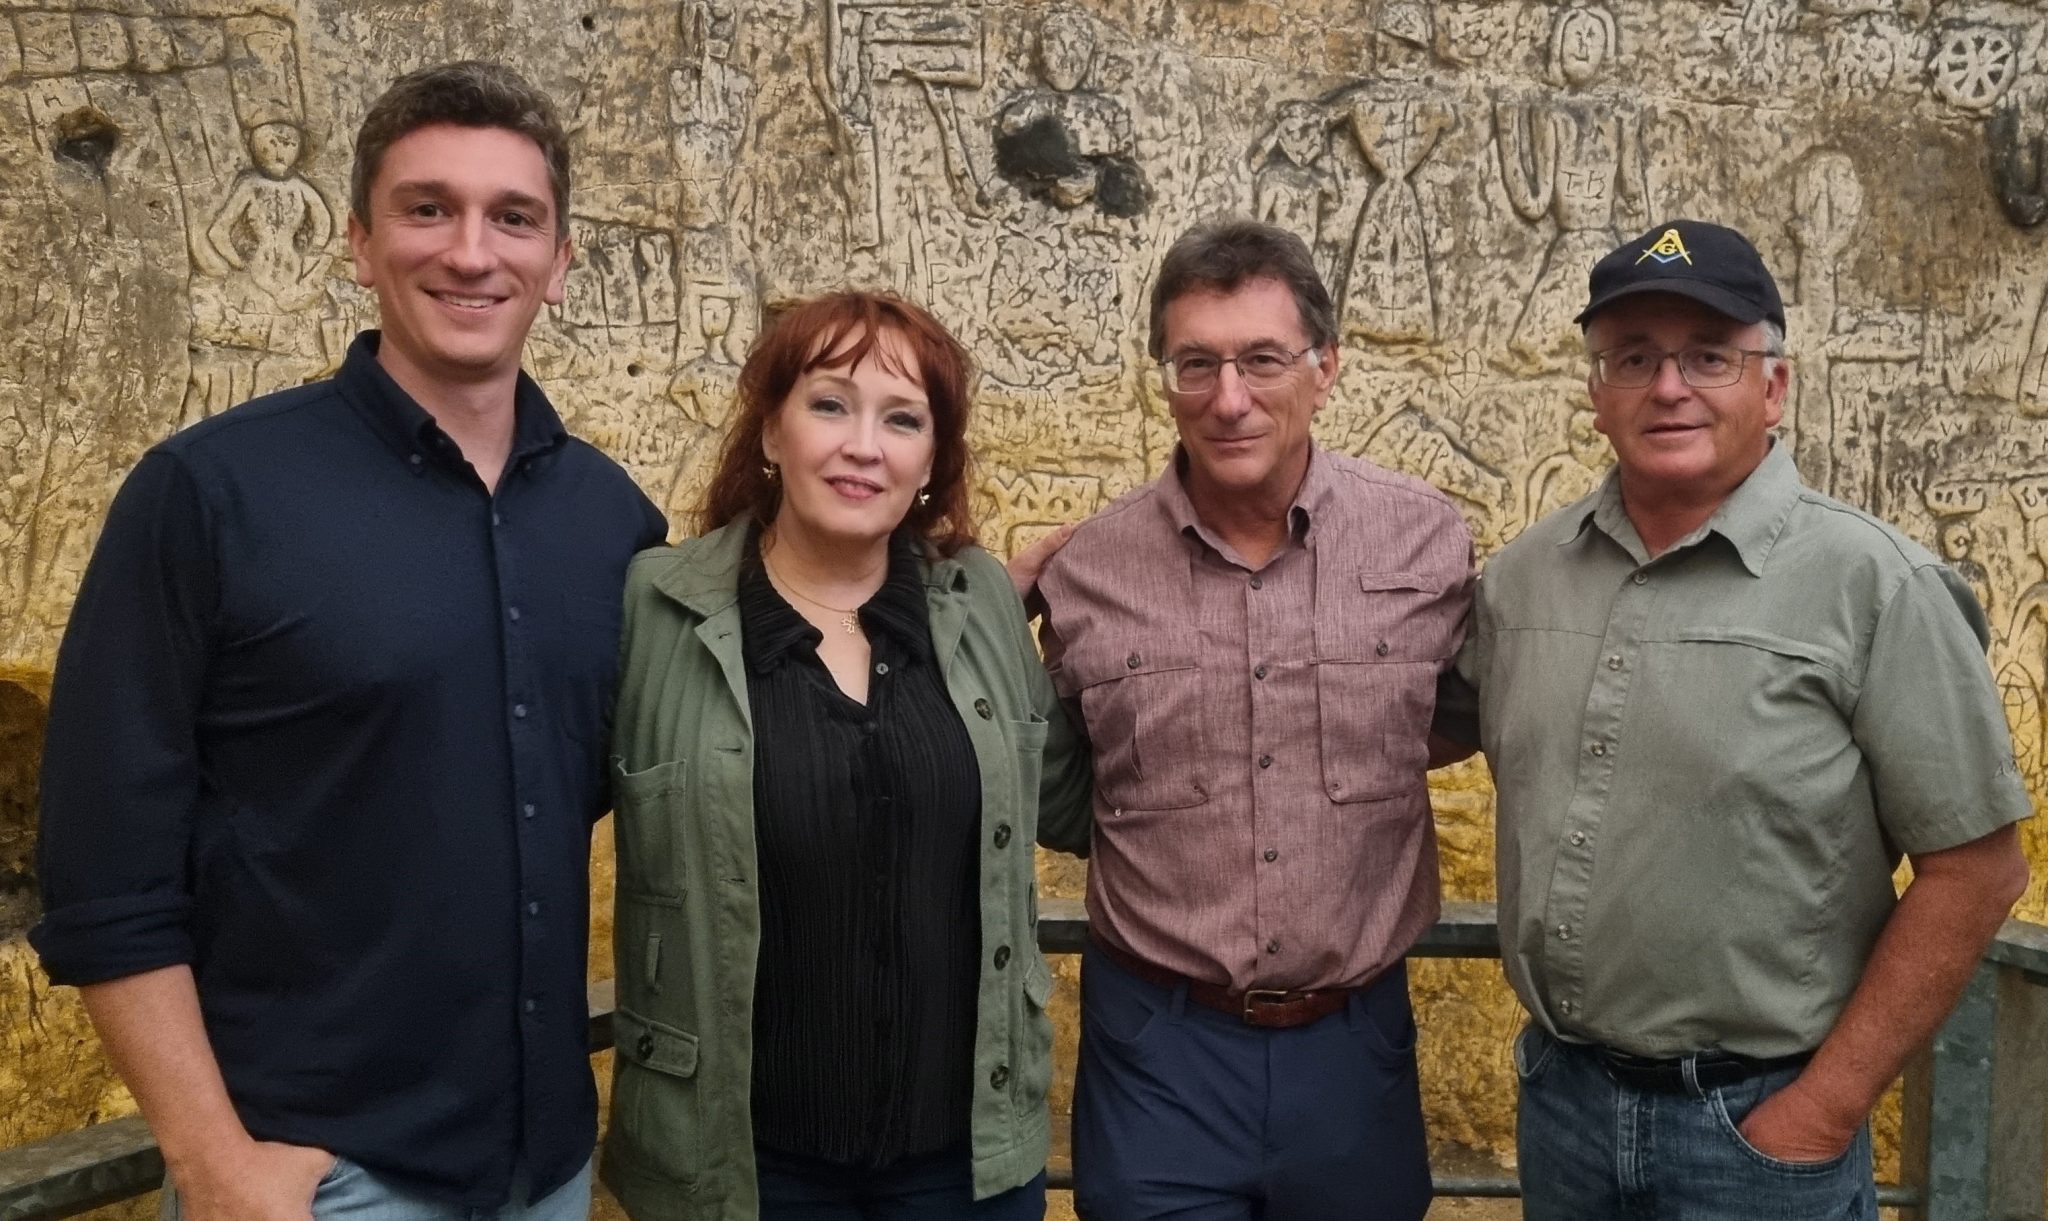 Gretchen Cornwall with "Curse of Oak Island" TV show cast in Royston Cave.